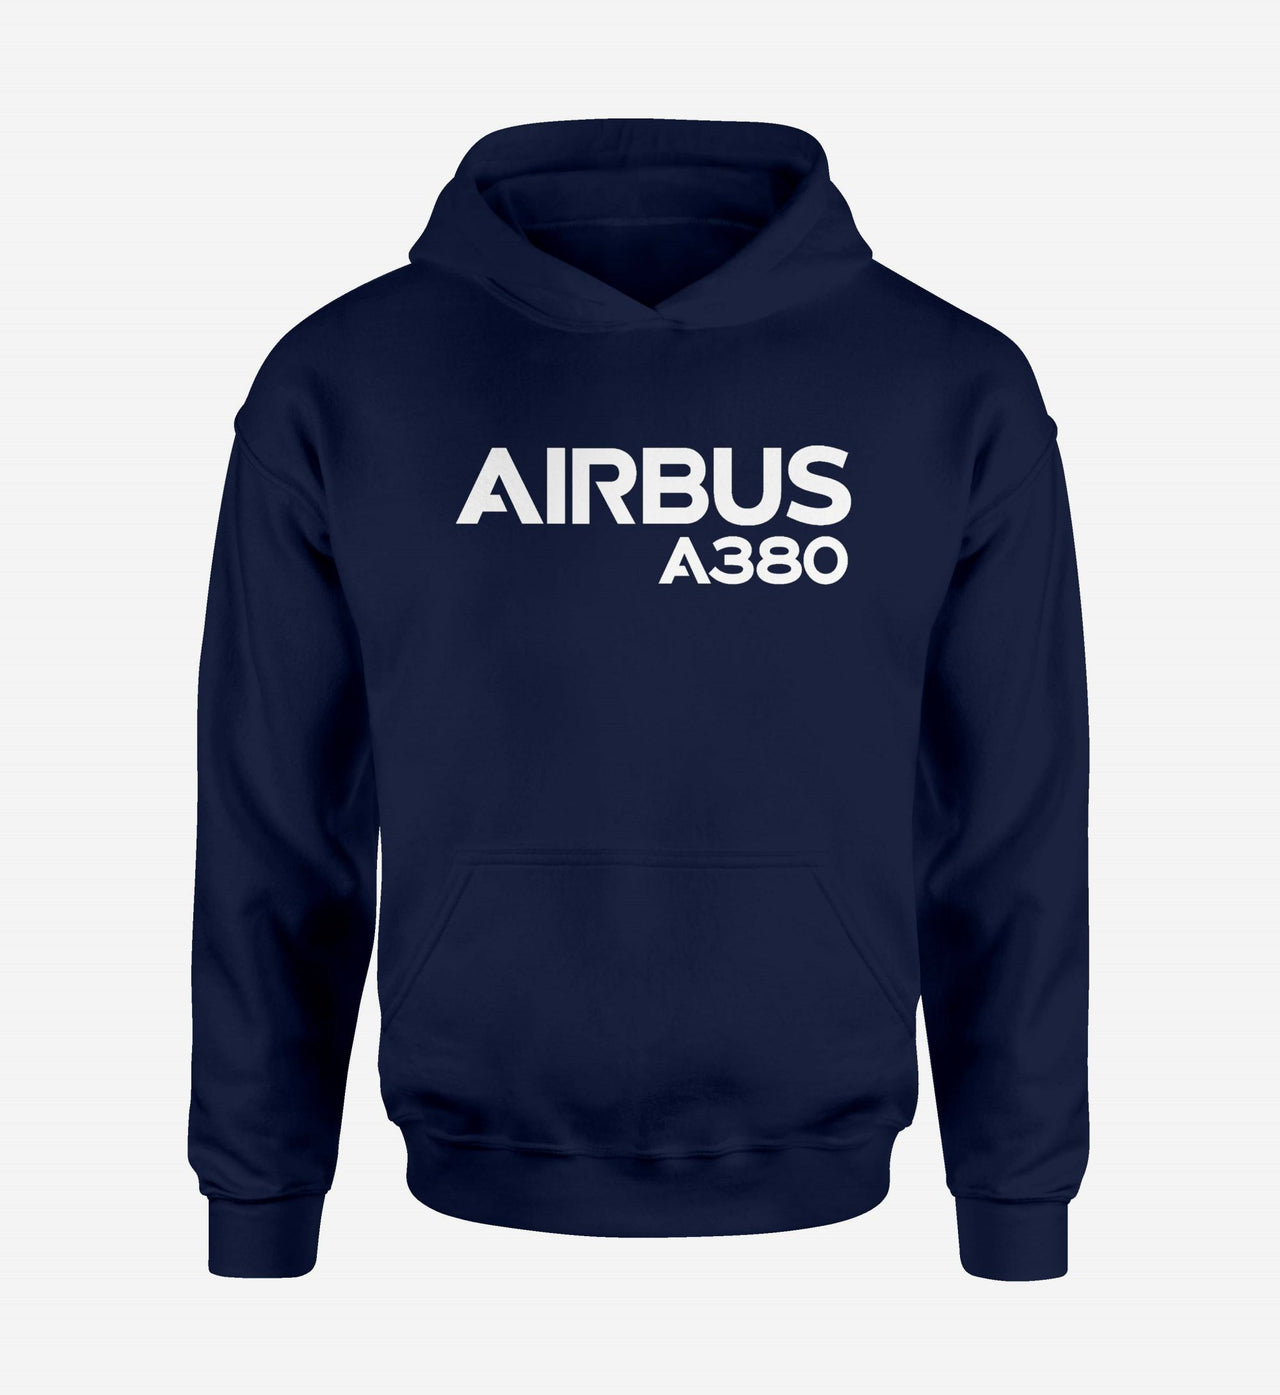 Airbus A380 & Text Designed Hoodies